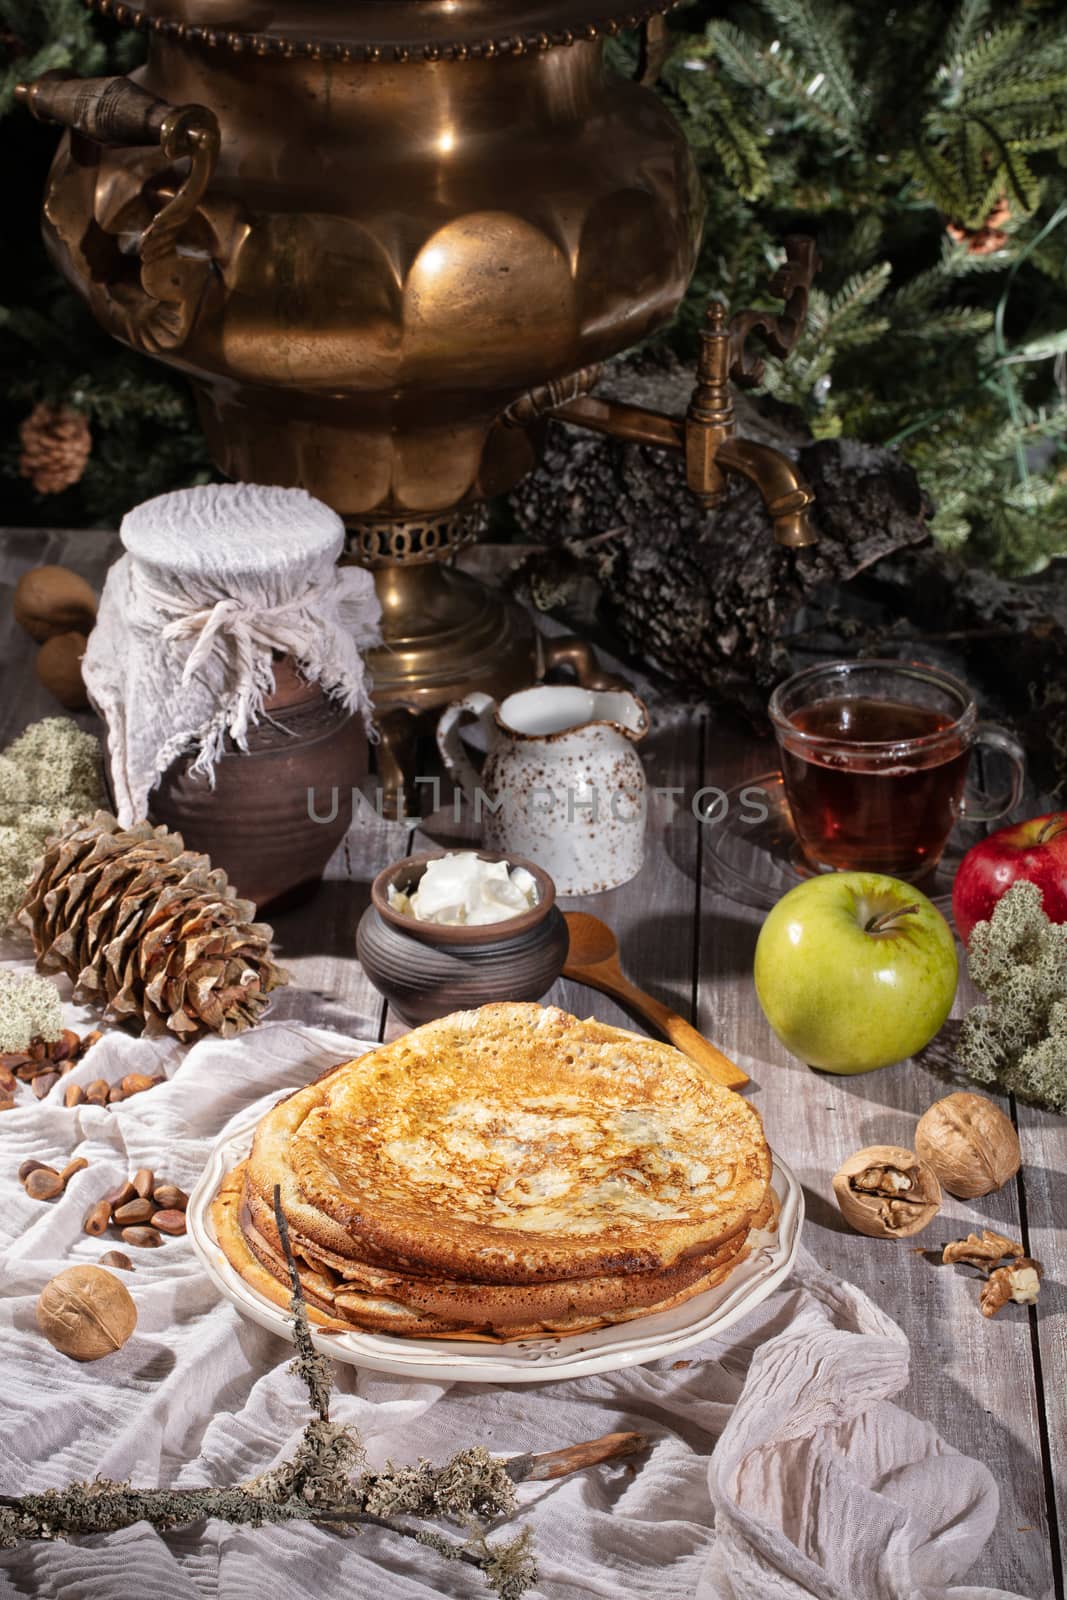 Pancakes, tea, cream and fruits on a fabric background